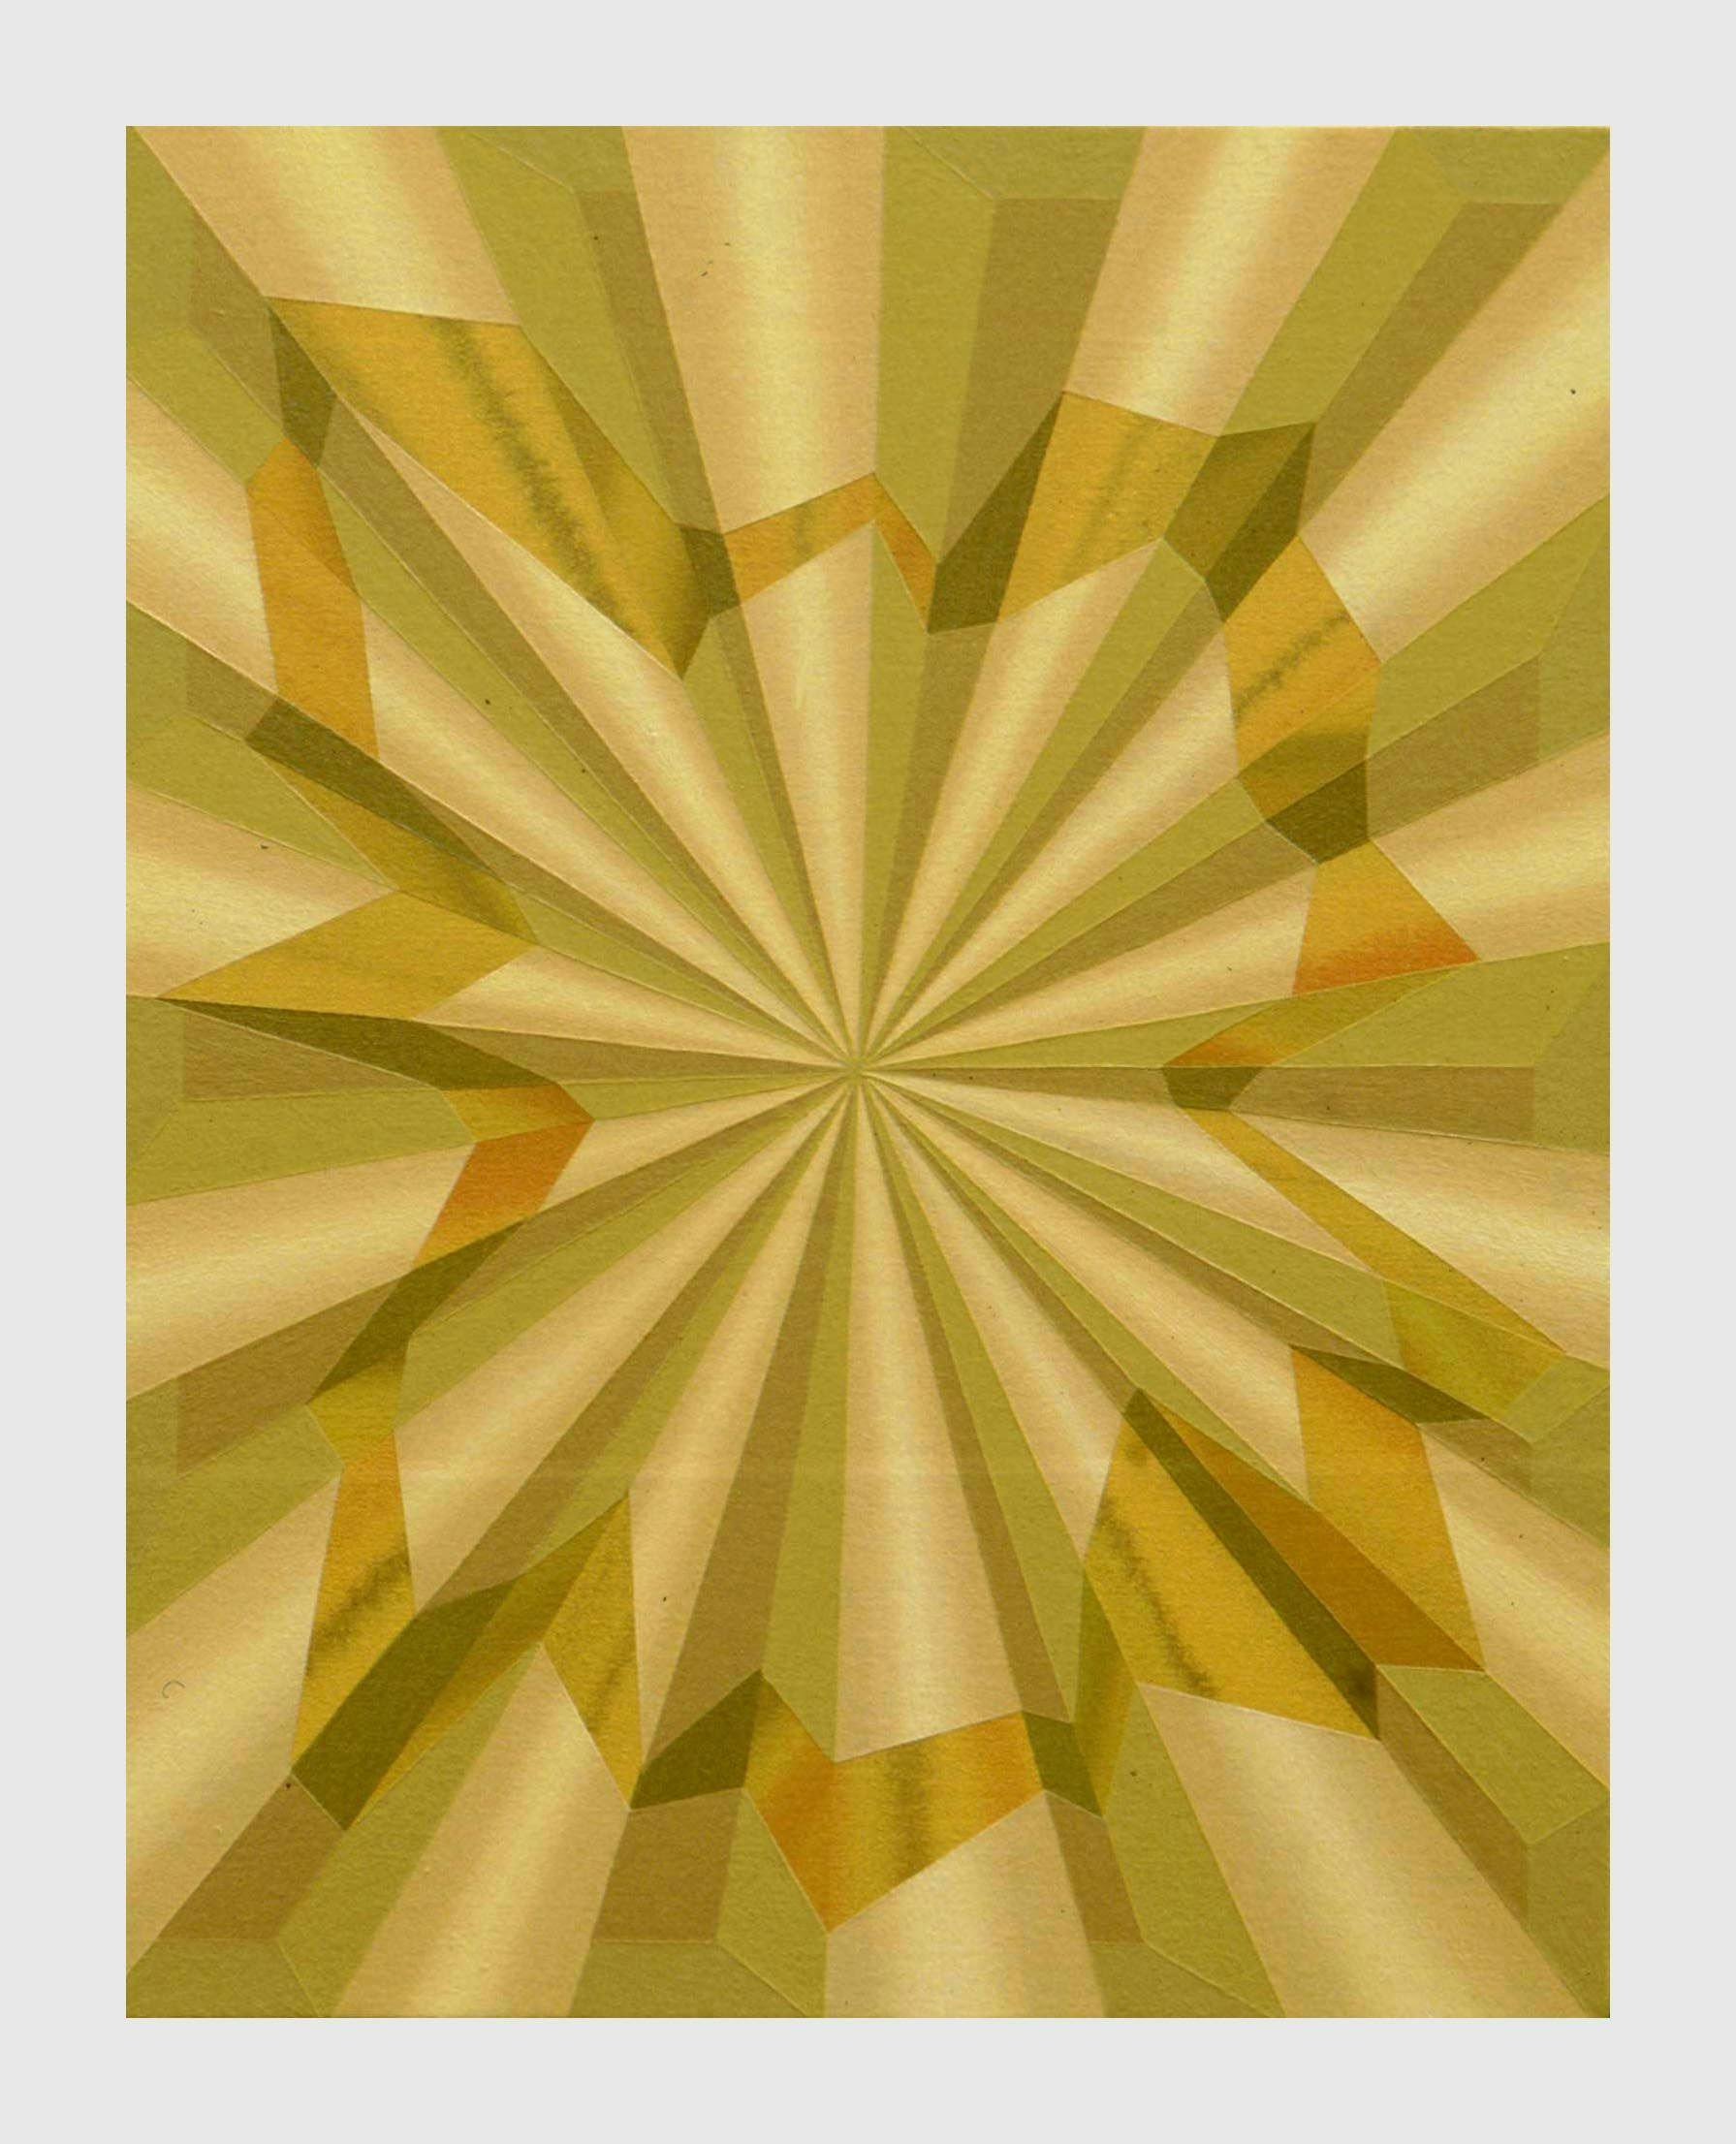 A painting by Tomma Abts, titled Teete, dated 2003.